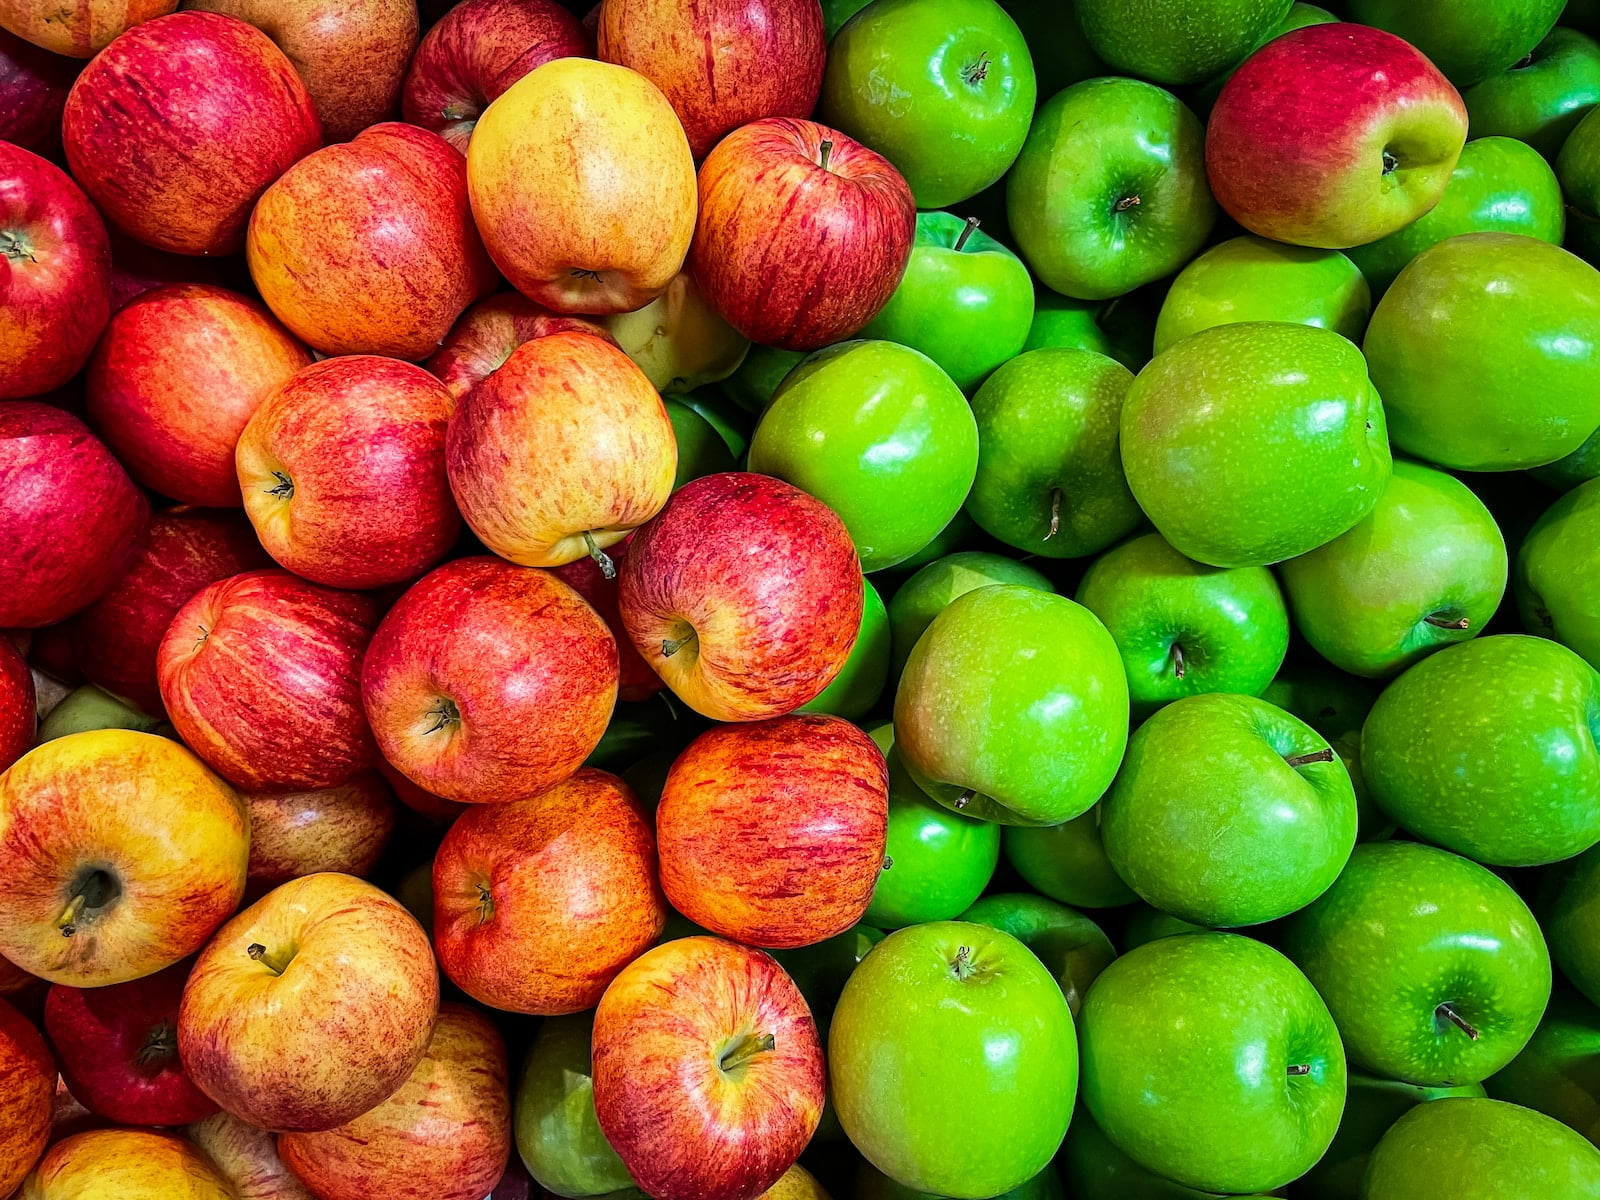 A colorful assortment of apples, including vibrant red and green varieties, with the addition of sunny yellow ones.